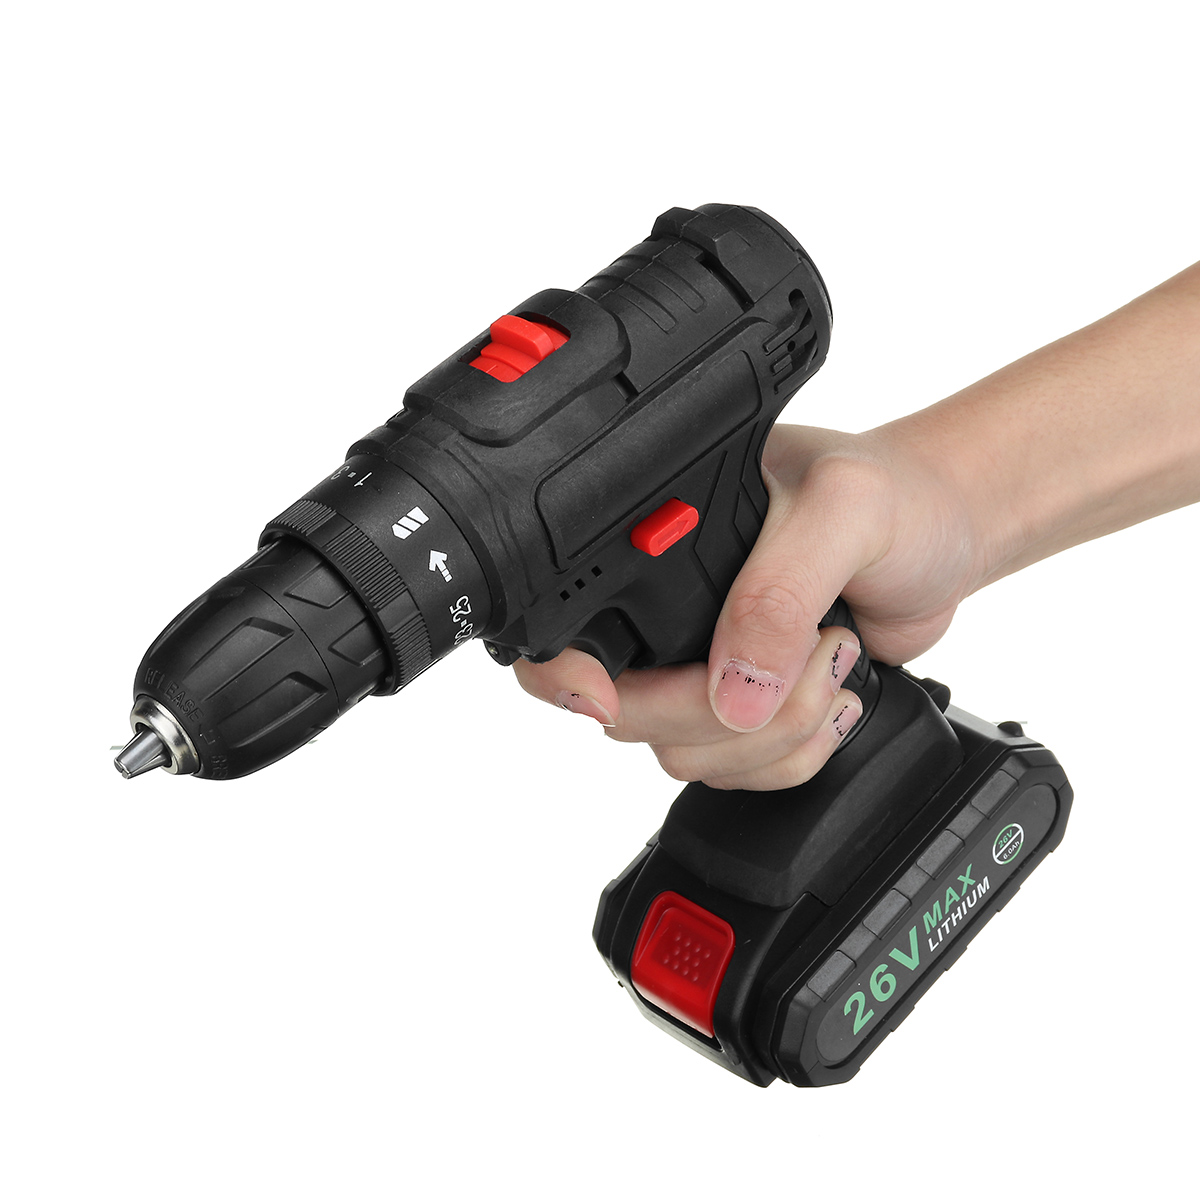 48V-1500W-Electric-Drill-28Nm-Max-Torque-LED-Light-Screwdriver-Power-W-12pc-Battery-1768846-2